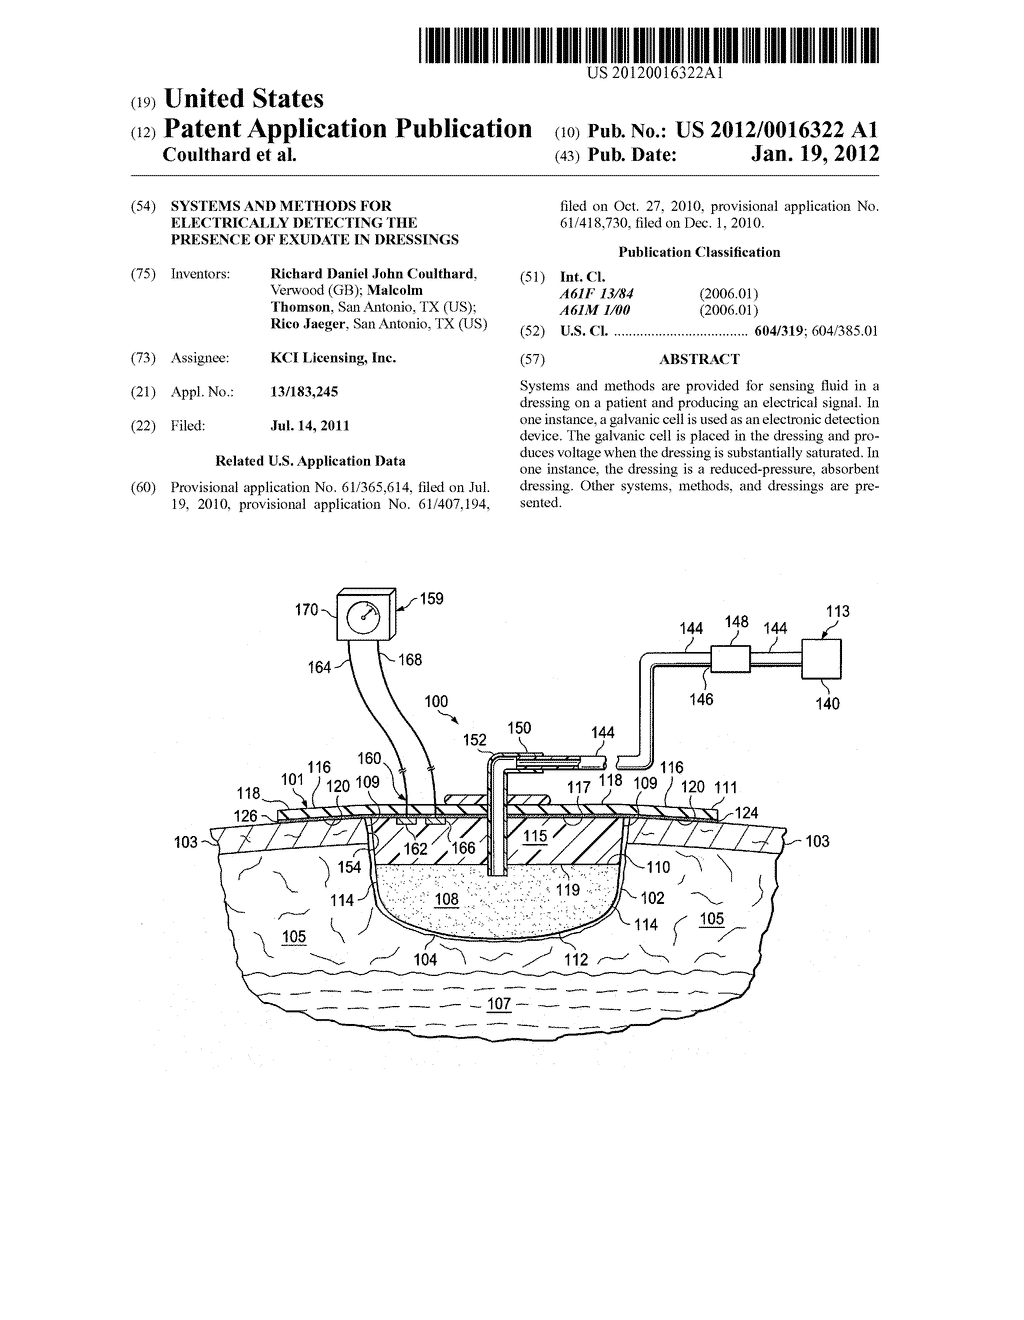 SYSTEMS AND METHODS FOR ELECTRICALLY DETECTING THE PRESENCE OF EXUDATE IN     DRESSINGS - diagram, schematic, and image 01